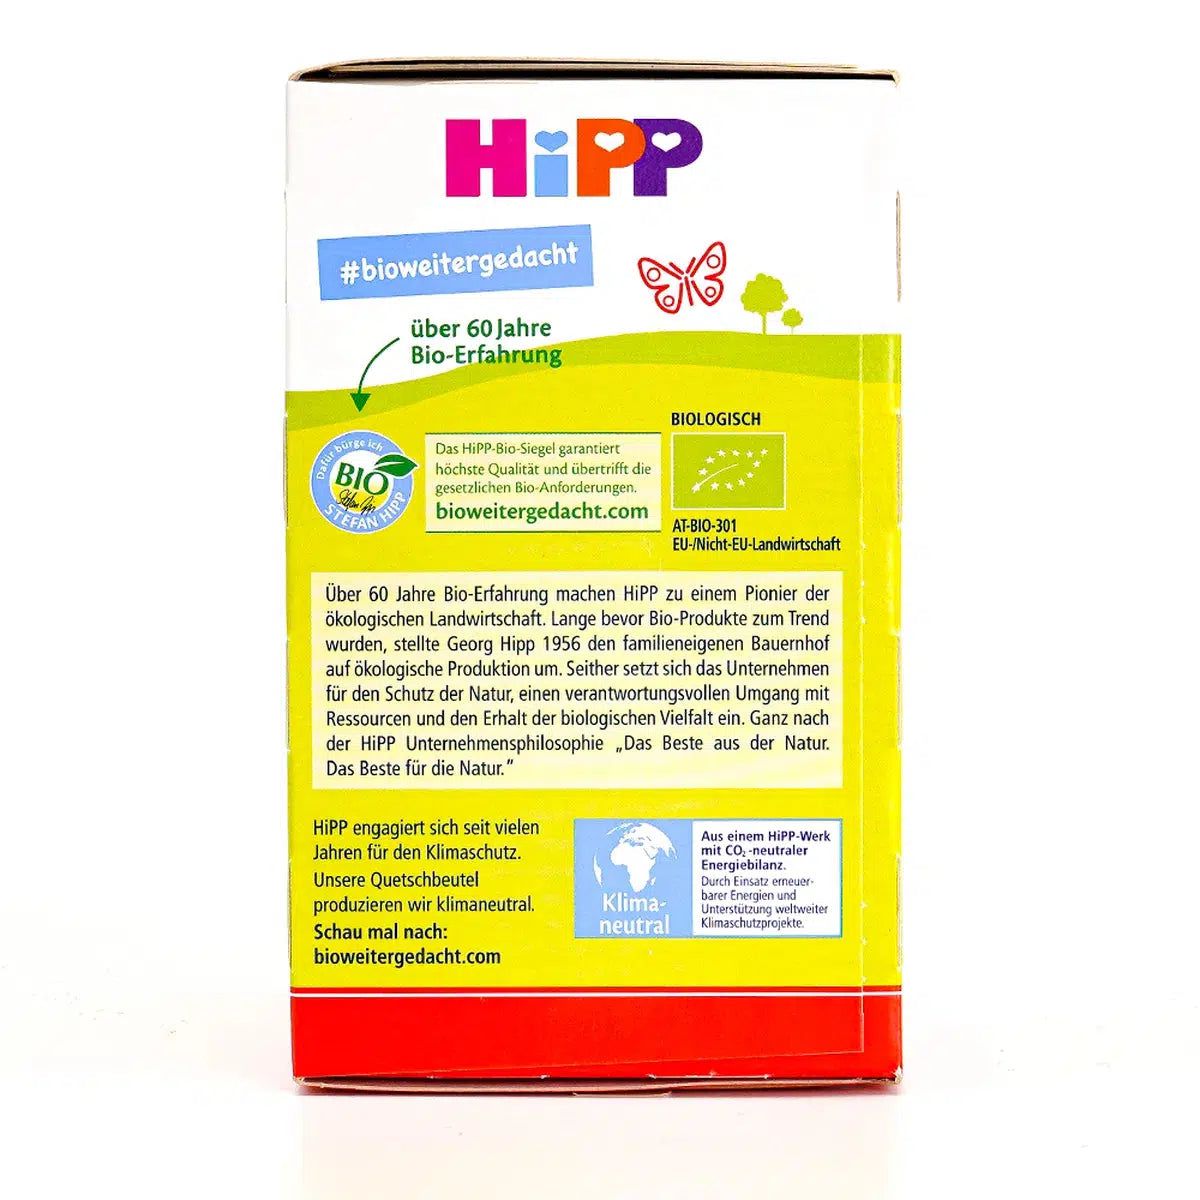 HiPP Fruit Pouches - Apple-Banana & Baby Biscuit (5+ Months) - 4 Pouches